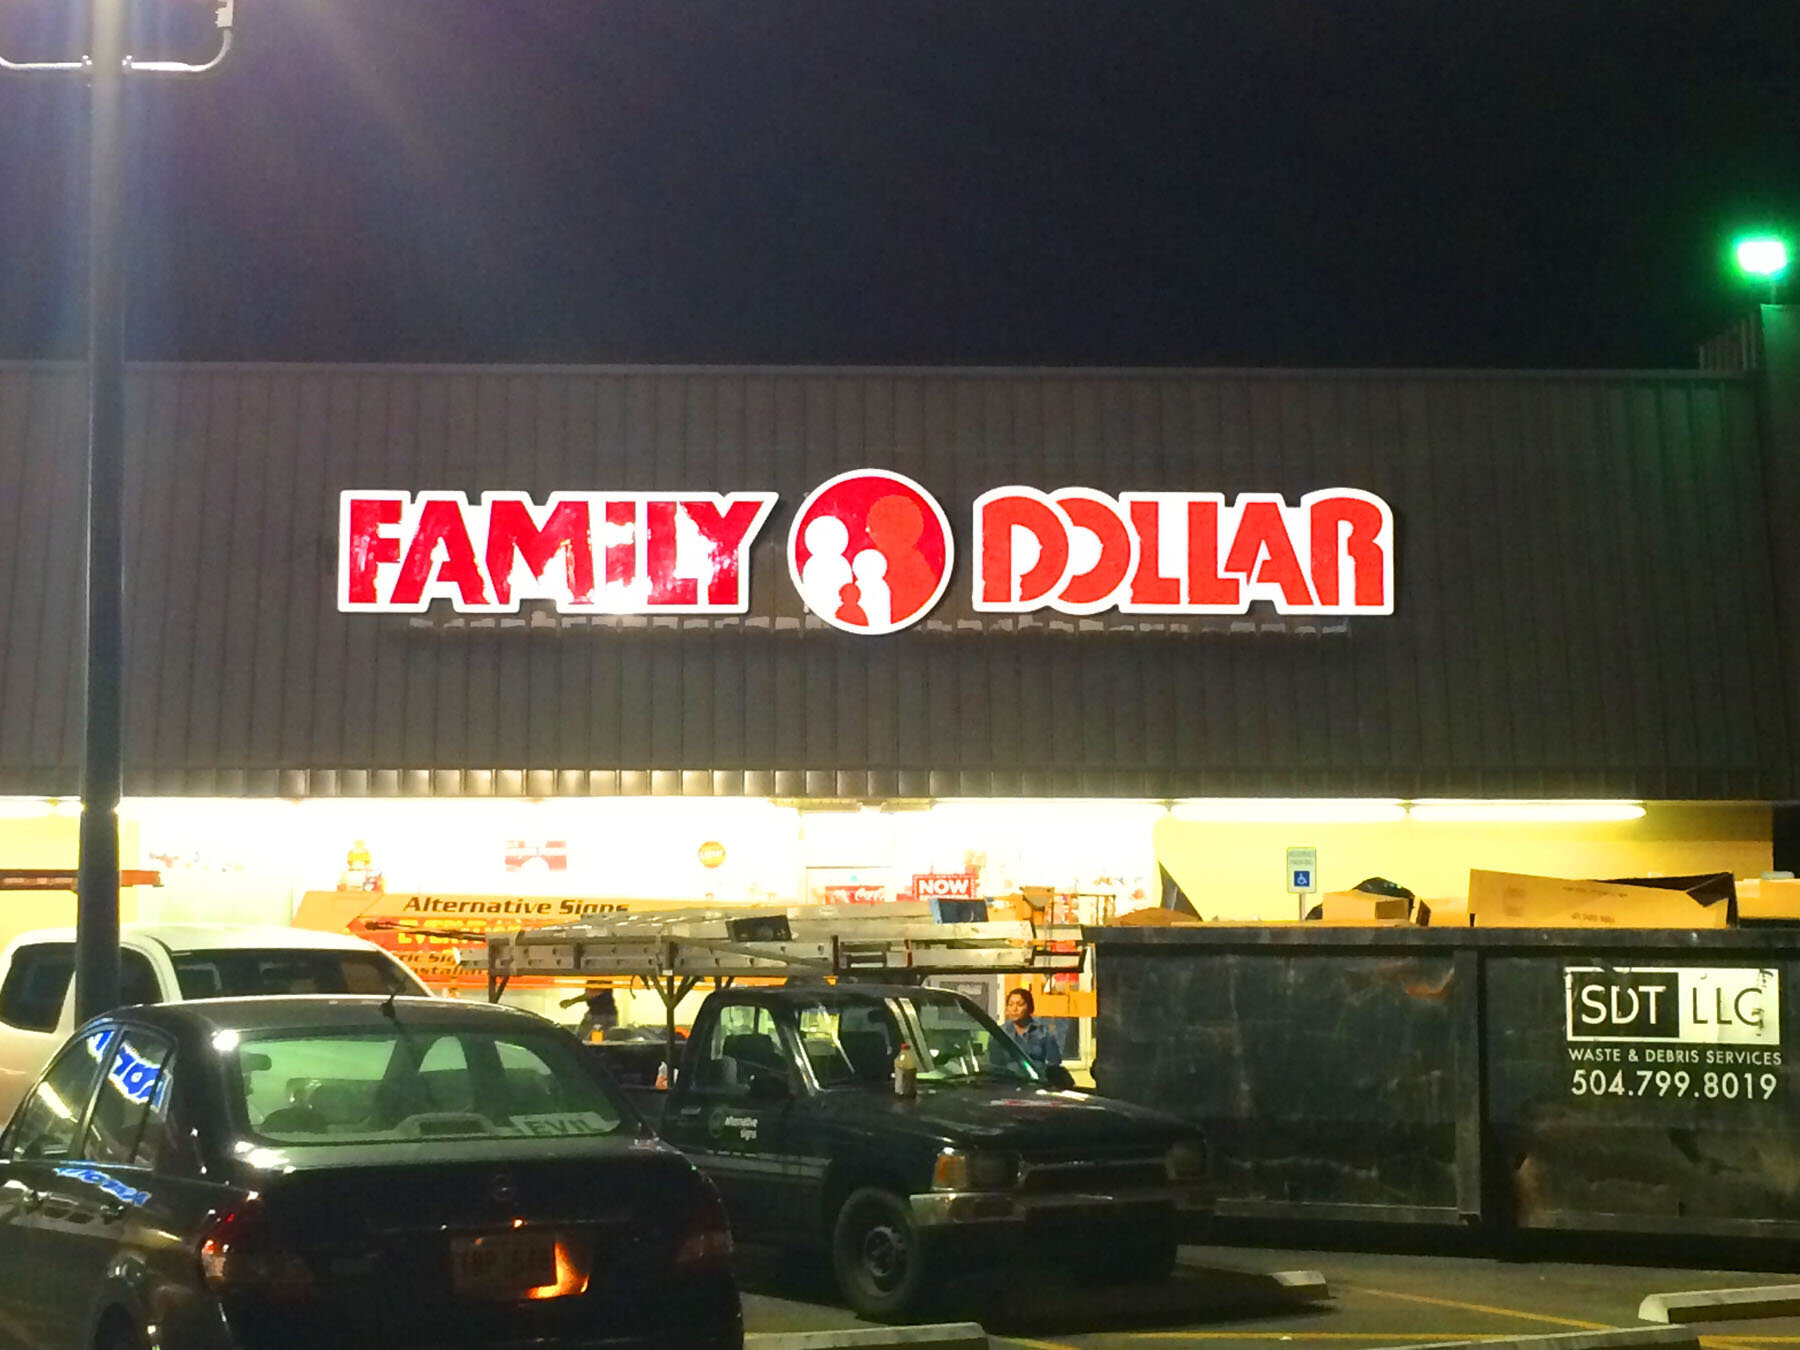 Family Dollar Channel Letters at Night